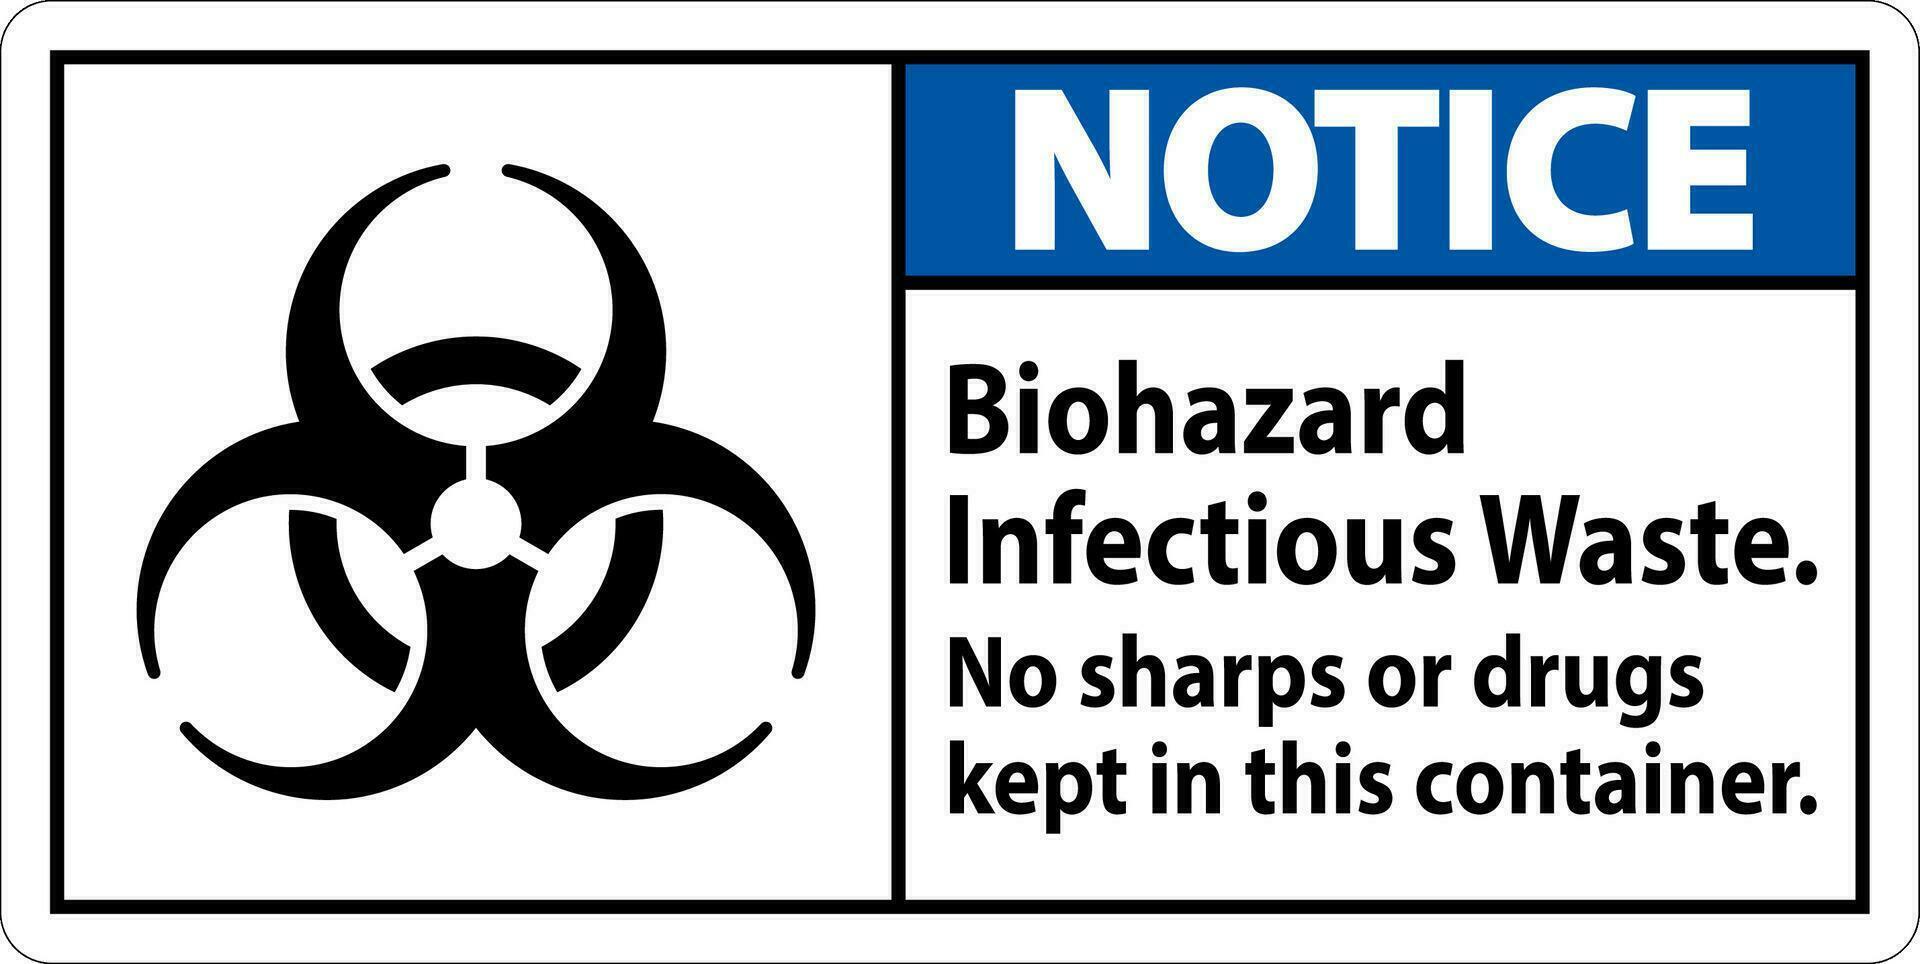 Notice Label Biohazard Infectious Waste, No Sharps Or Drugs Kept In This Container vector